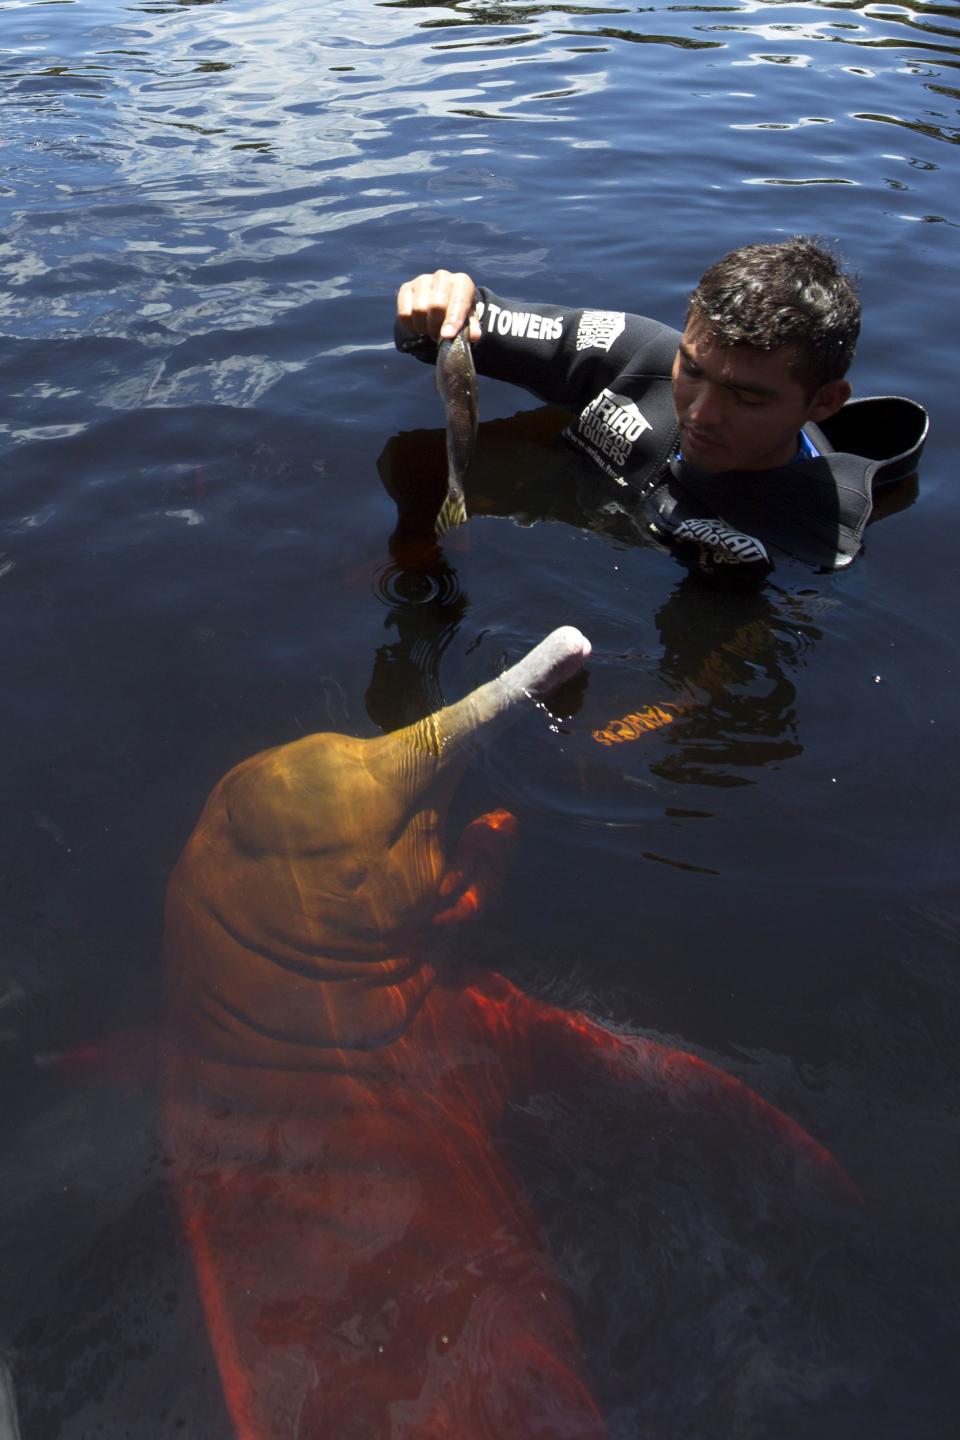 A worker feeds a river dolphin in front of the Ariau hotel in the Amazon jungle near to Manaus, in northern Brazil, March 28, 2014. Manaus is one of the host cities for the 2014 soccer World Cup in Brazil. REUTERS/Bruno Kelly (BRAZIL - Tags: SPORT SOCCER WORLD CUP SOCIETY ANIMALS)